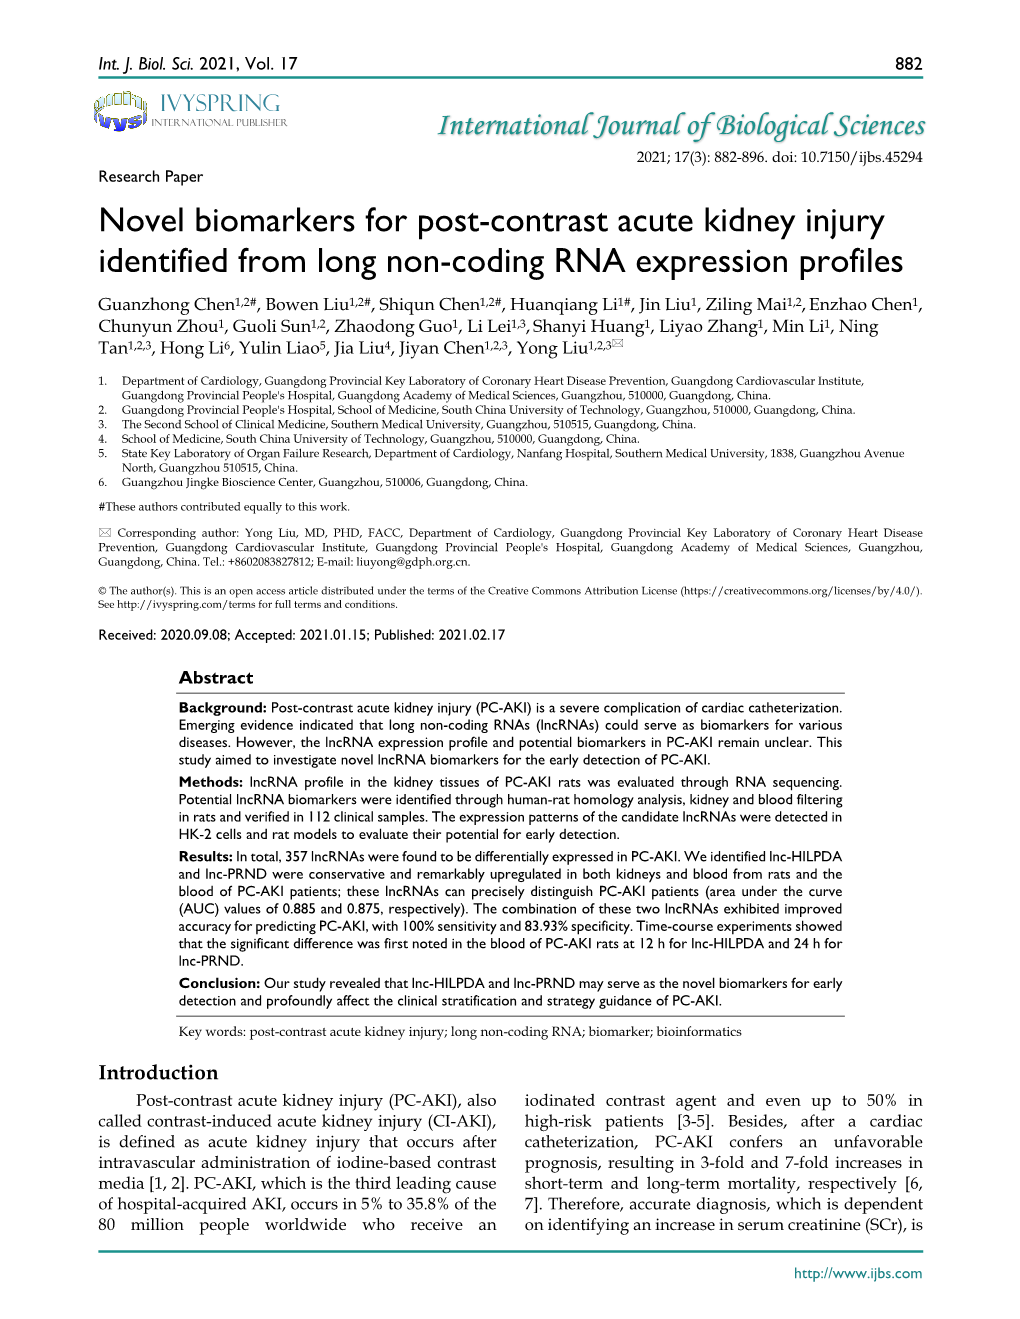 Novel Biomarkers for Post-Contrast Acute Kidney Injury Identified From